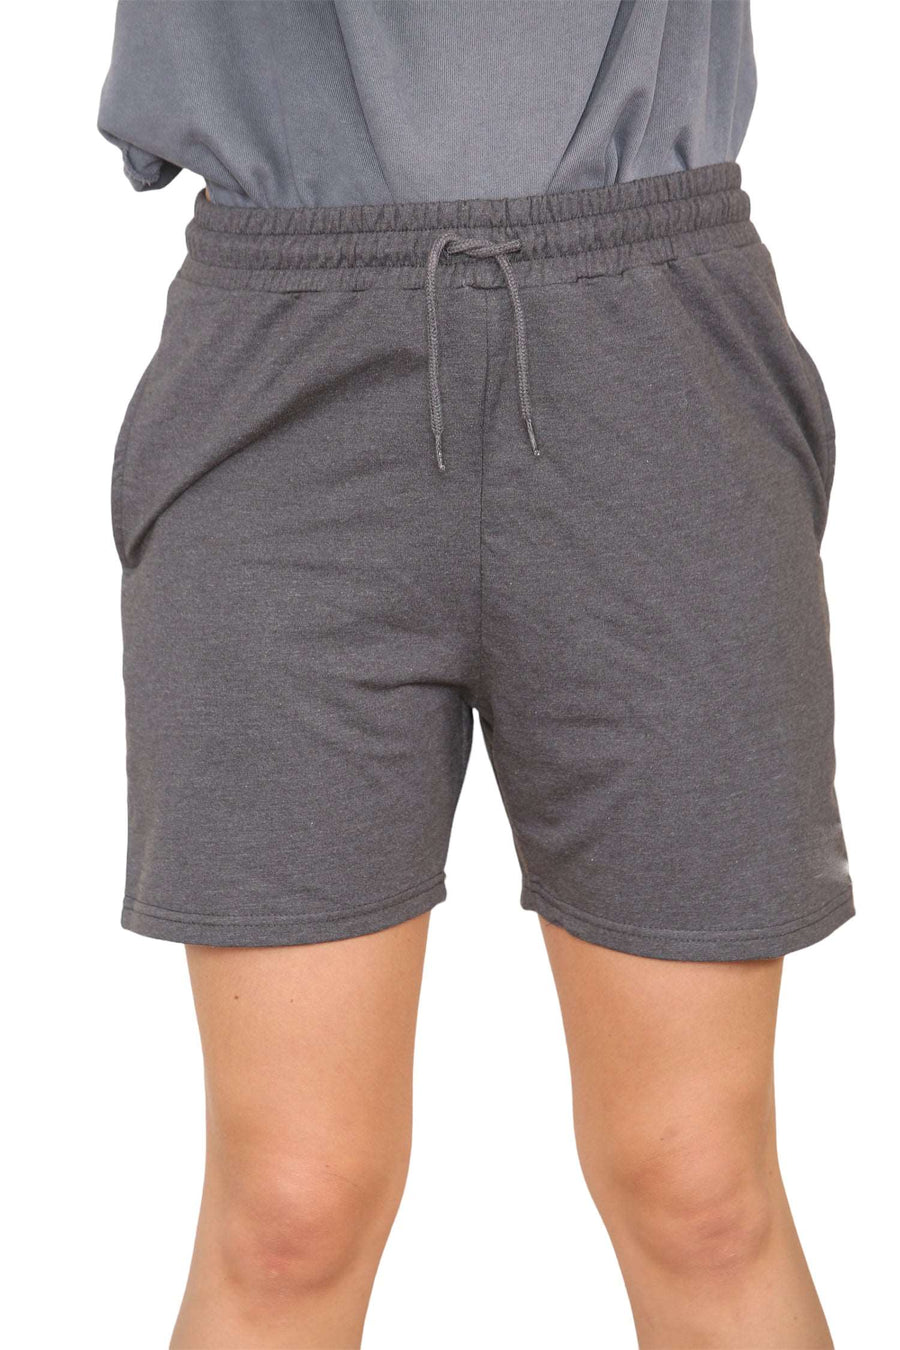 Comfy Mid-Length Charcoal Cycling Shorts for Women!